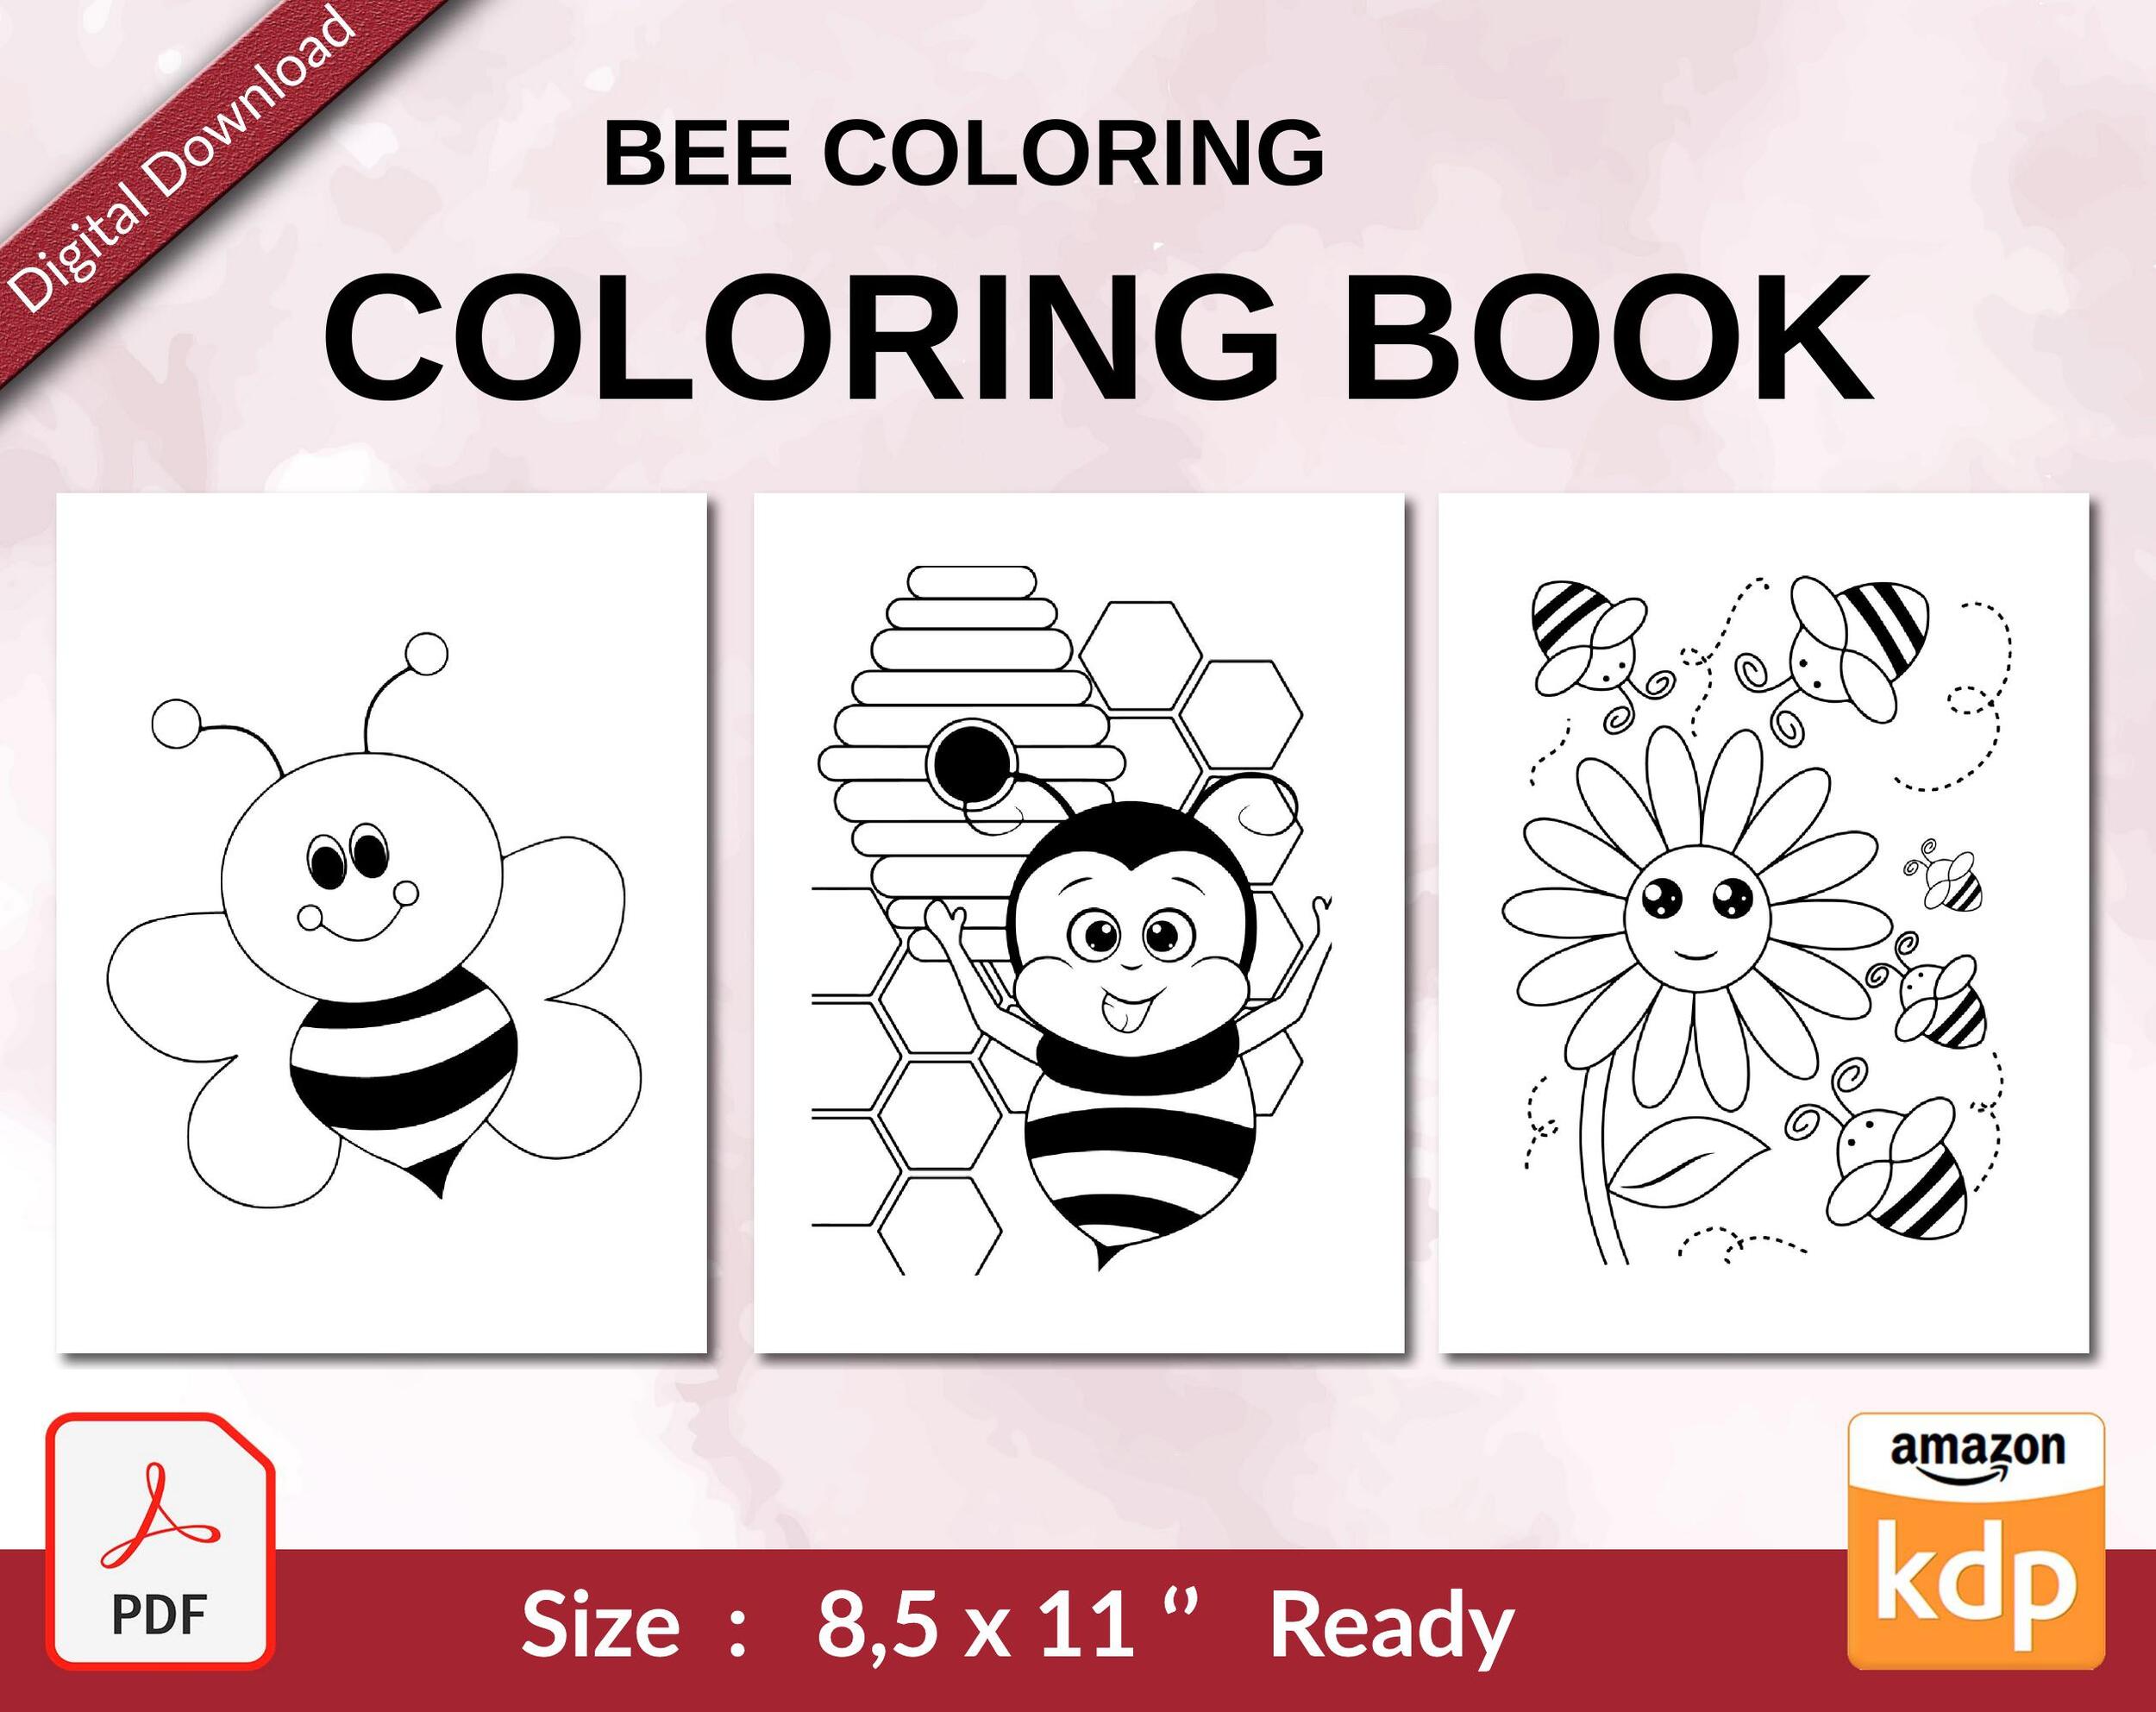 Insect Coloring Book for Kids Ages 4-8 / Learn Fun Facts 